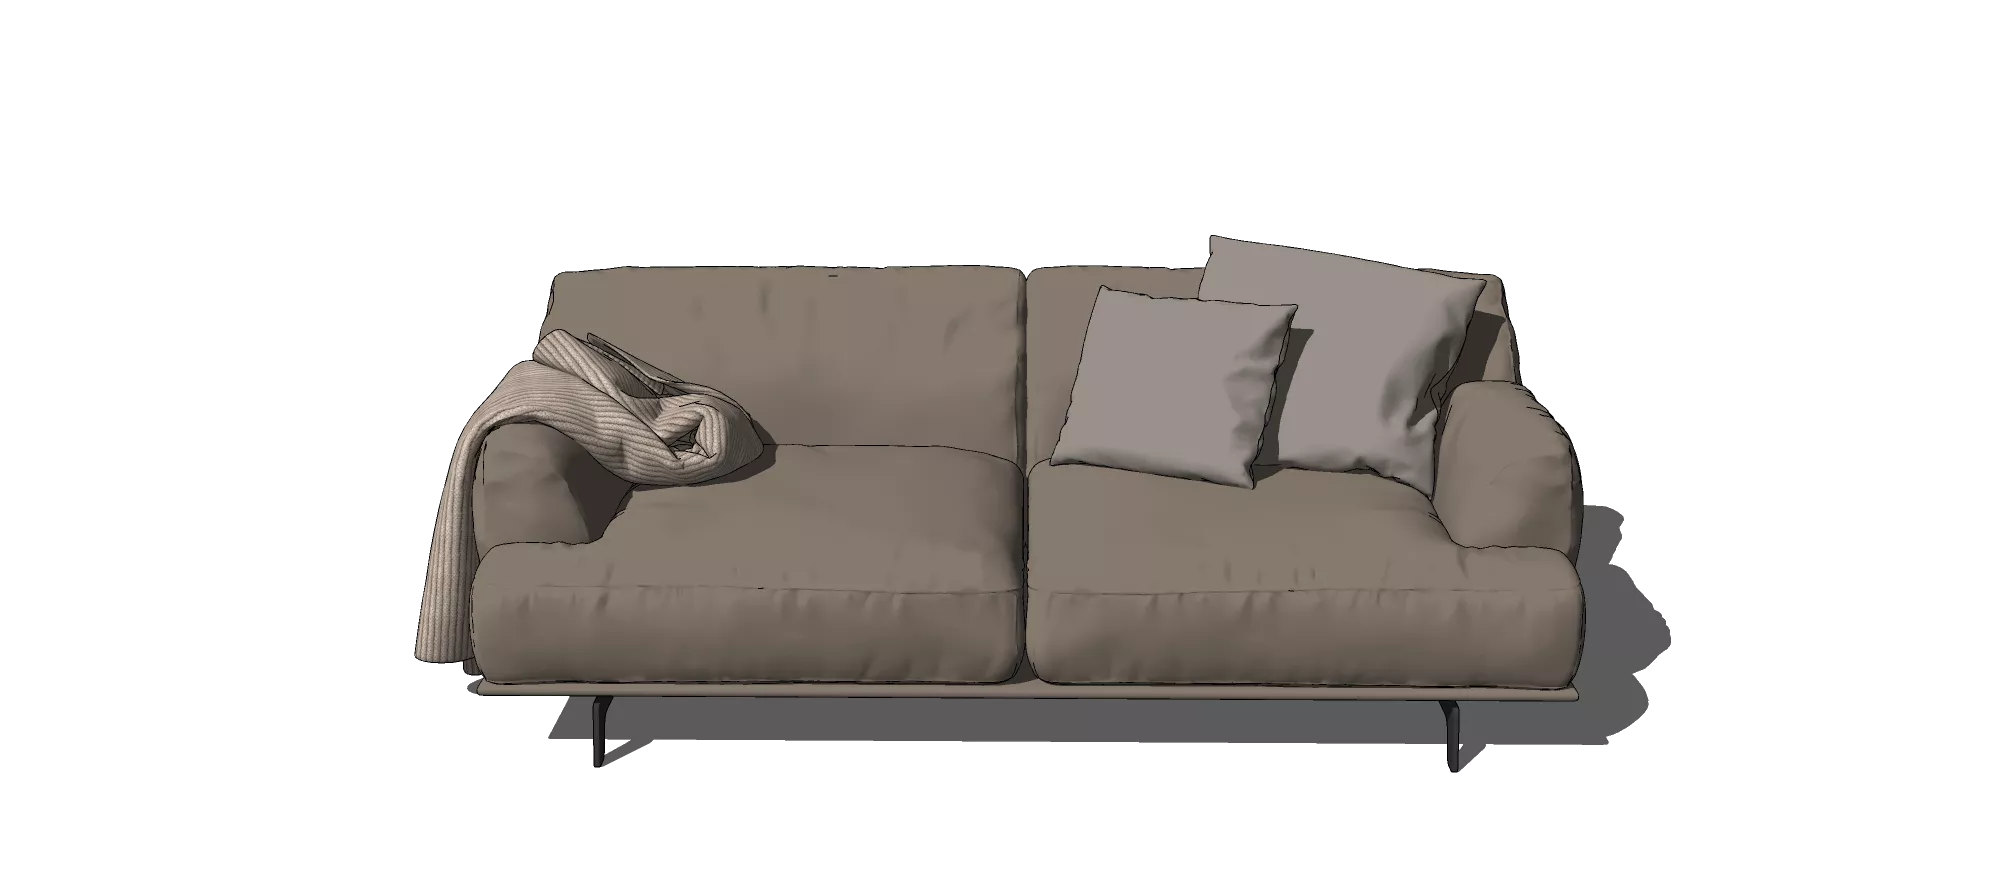 MODERN SOFA - SKETCHUP 3D MODEL - VRAY OR ENSCAPE - ID13107